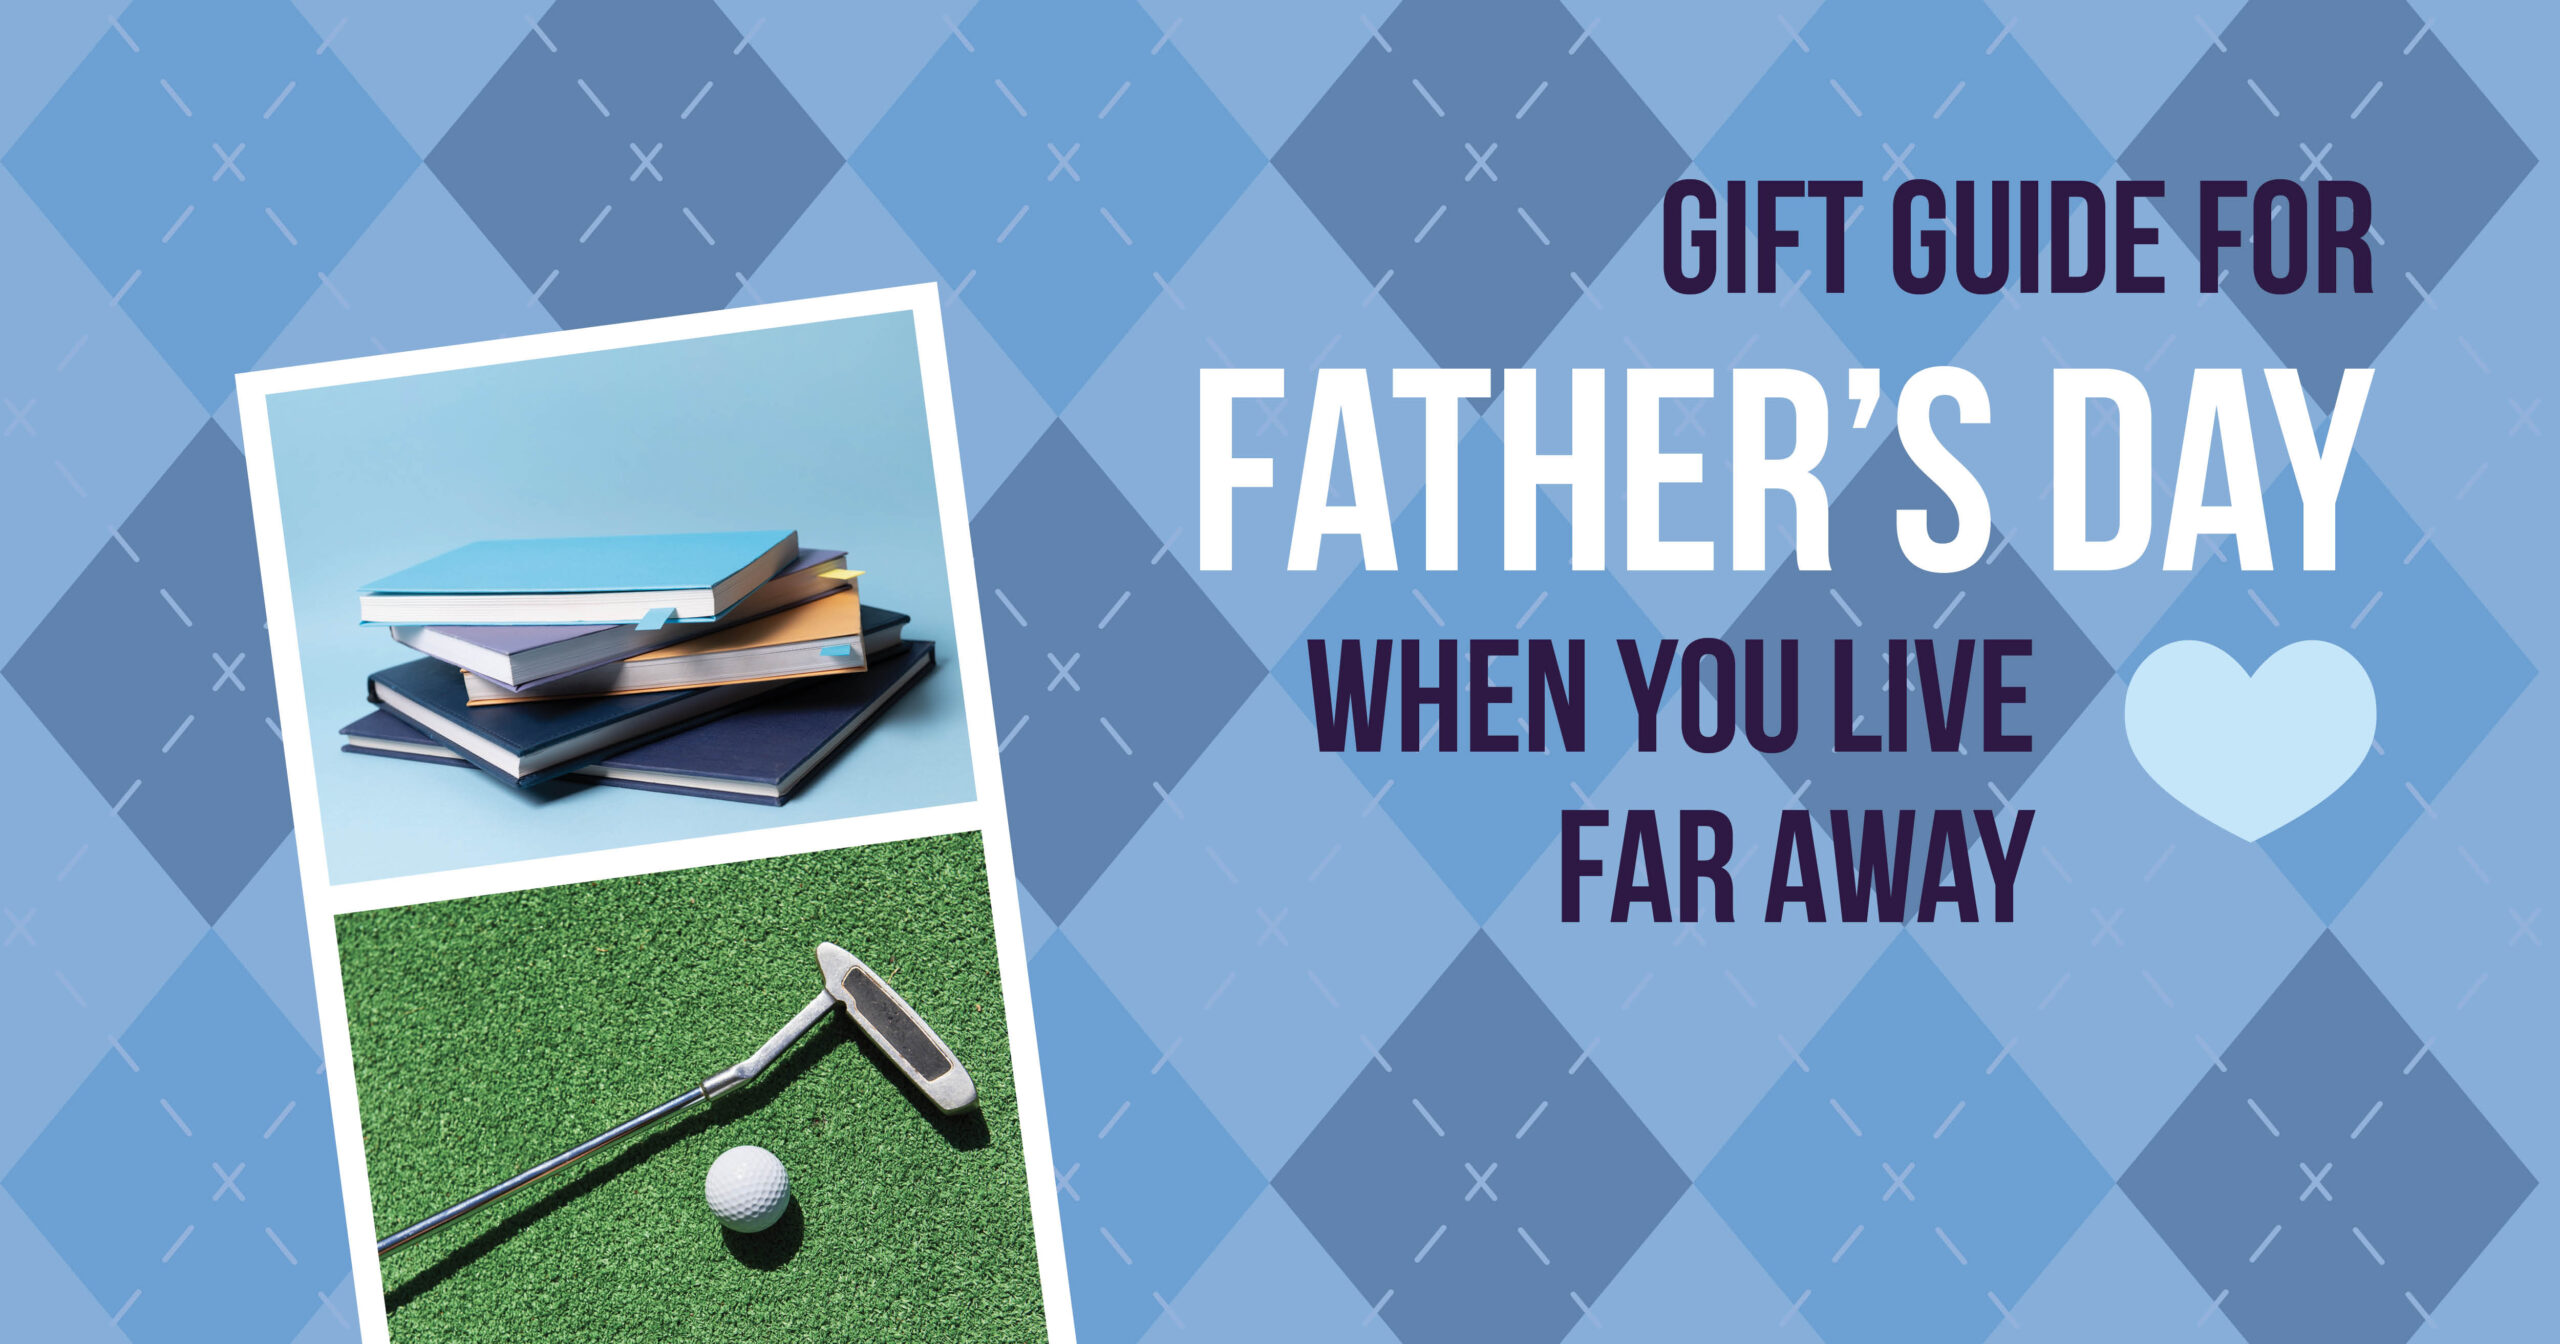 Make Father’s Day Special From Far Away